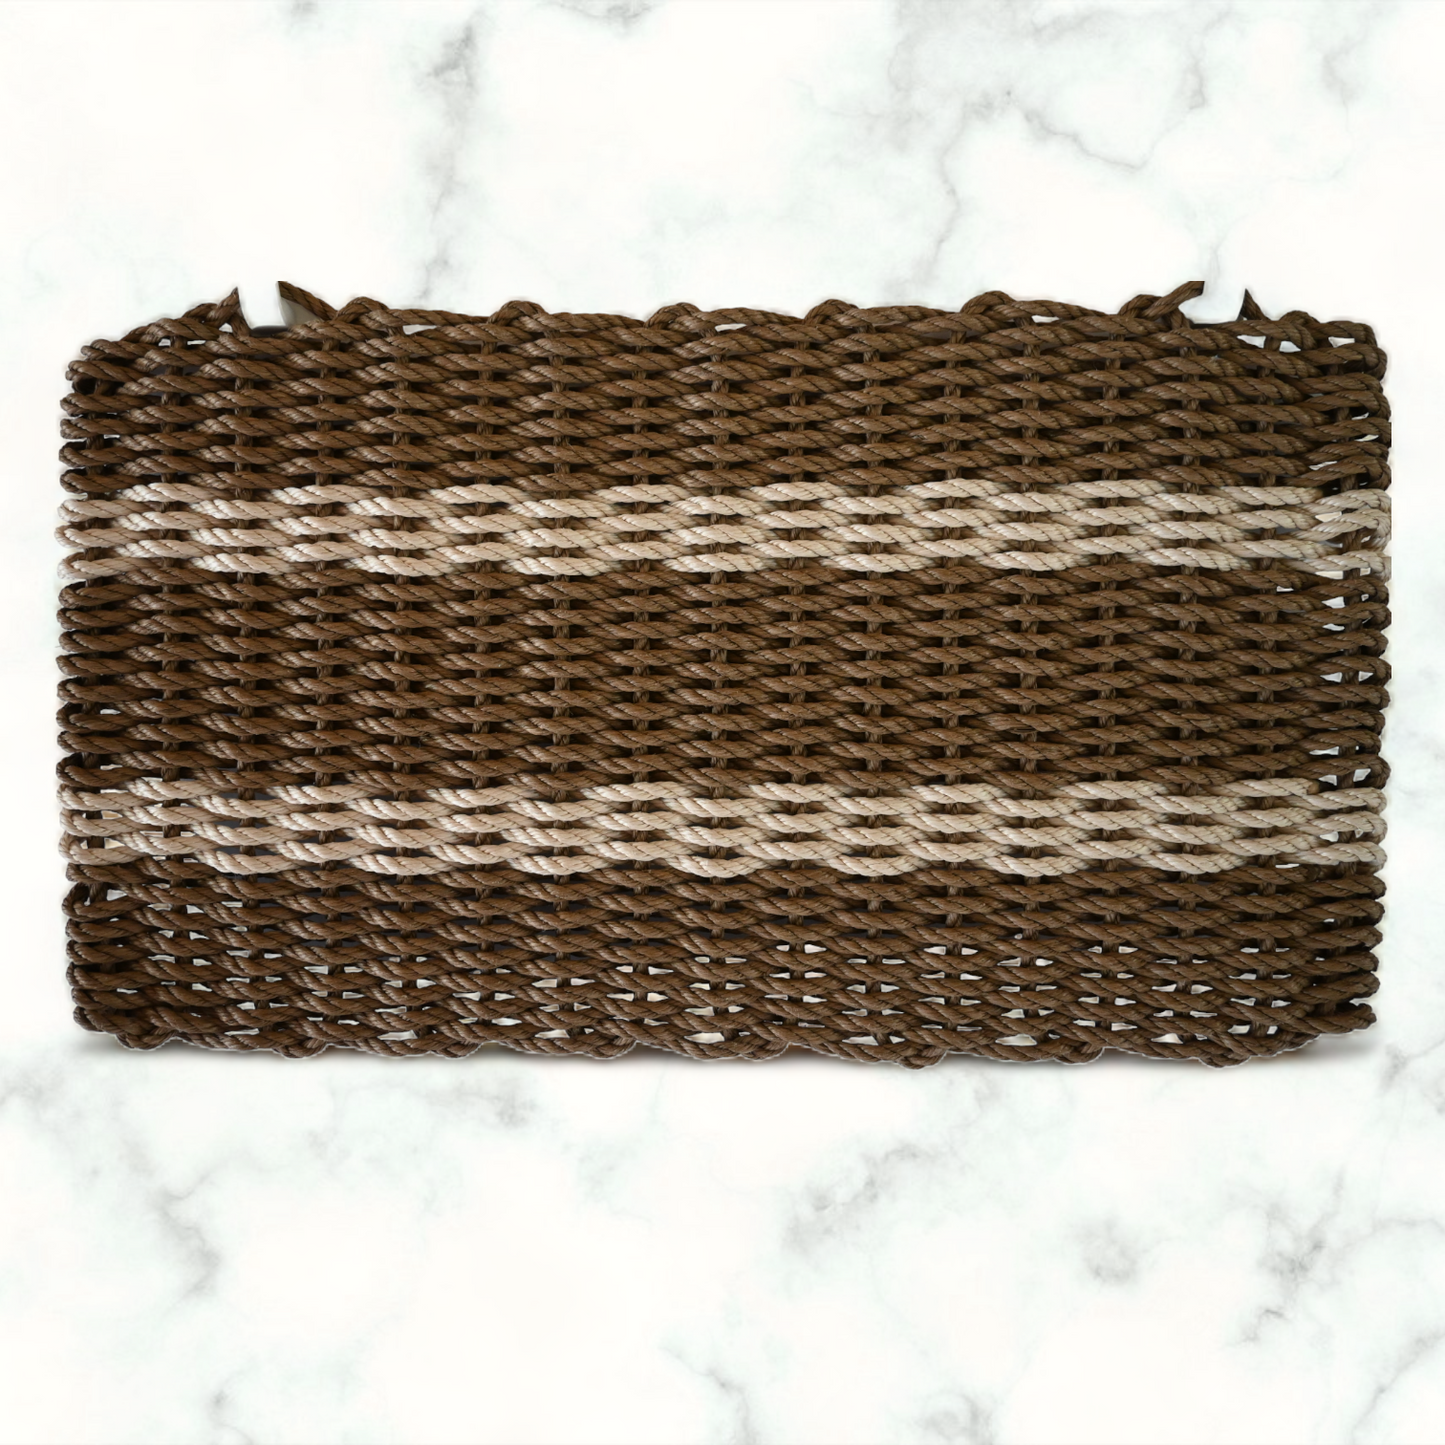 Five Stripe Rope Mat - Brown With Light Tan